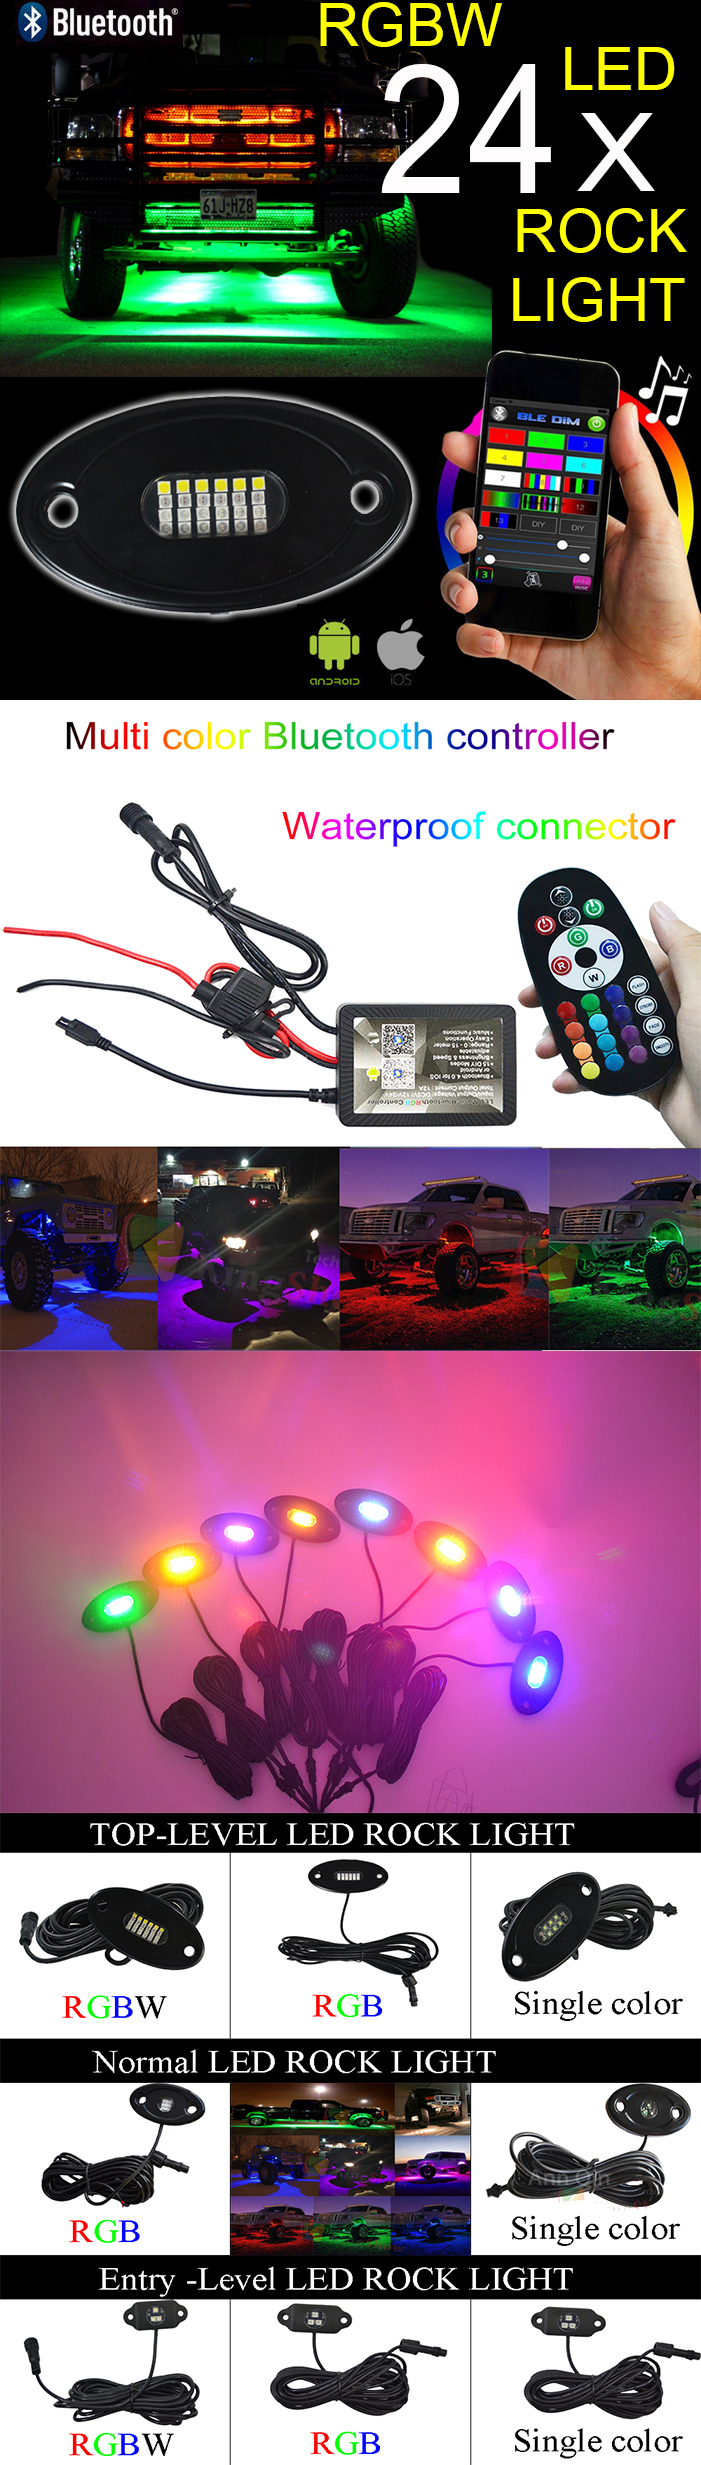 8 Pods RGBW LED Rock Lights - Multicolor Underglow Neon Light Kit with Blue-tooth Controller, Music Mode